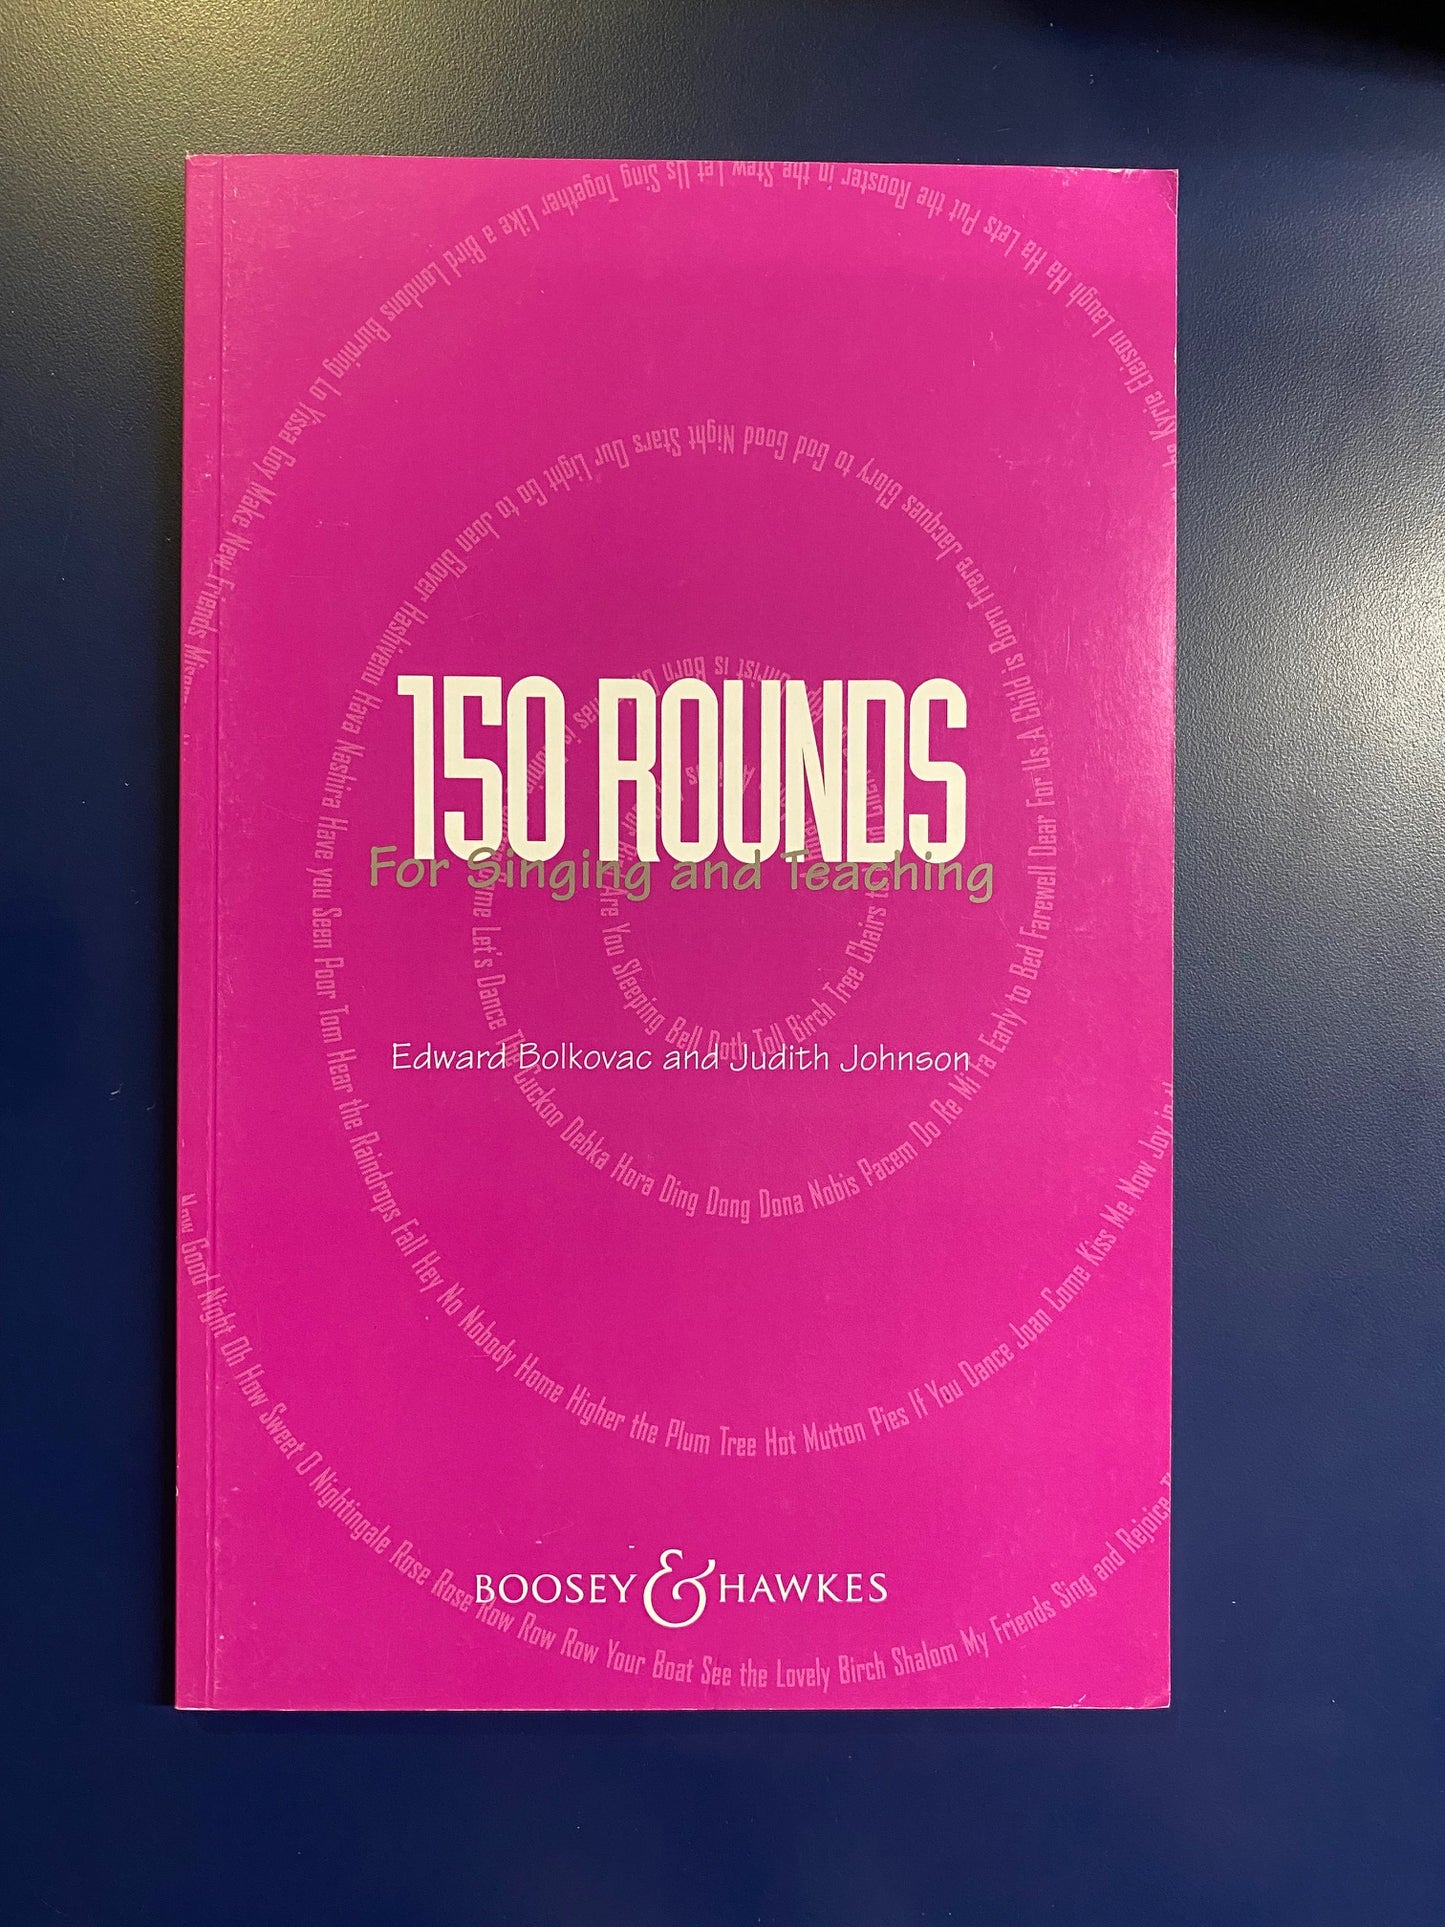 150 Rounds for Singing and Teaching (Bolkovac)